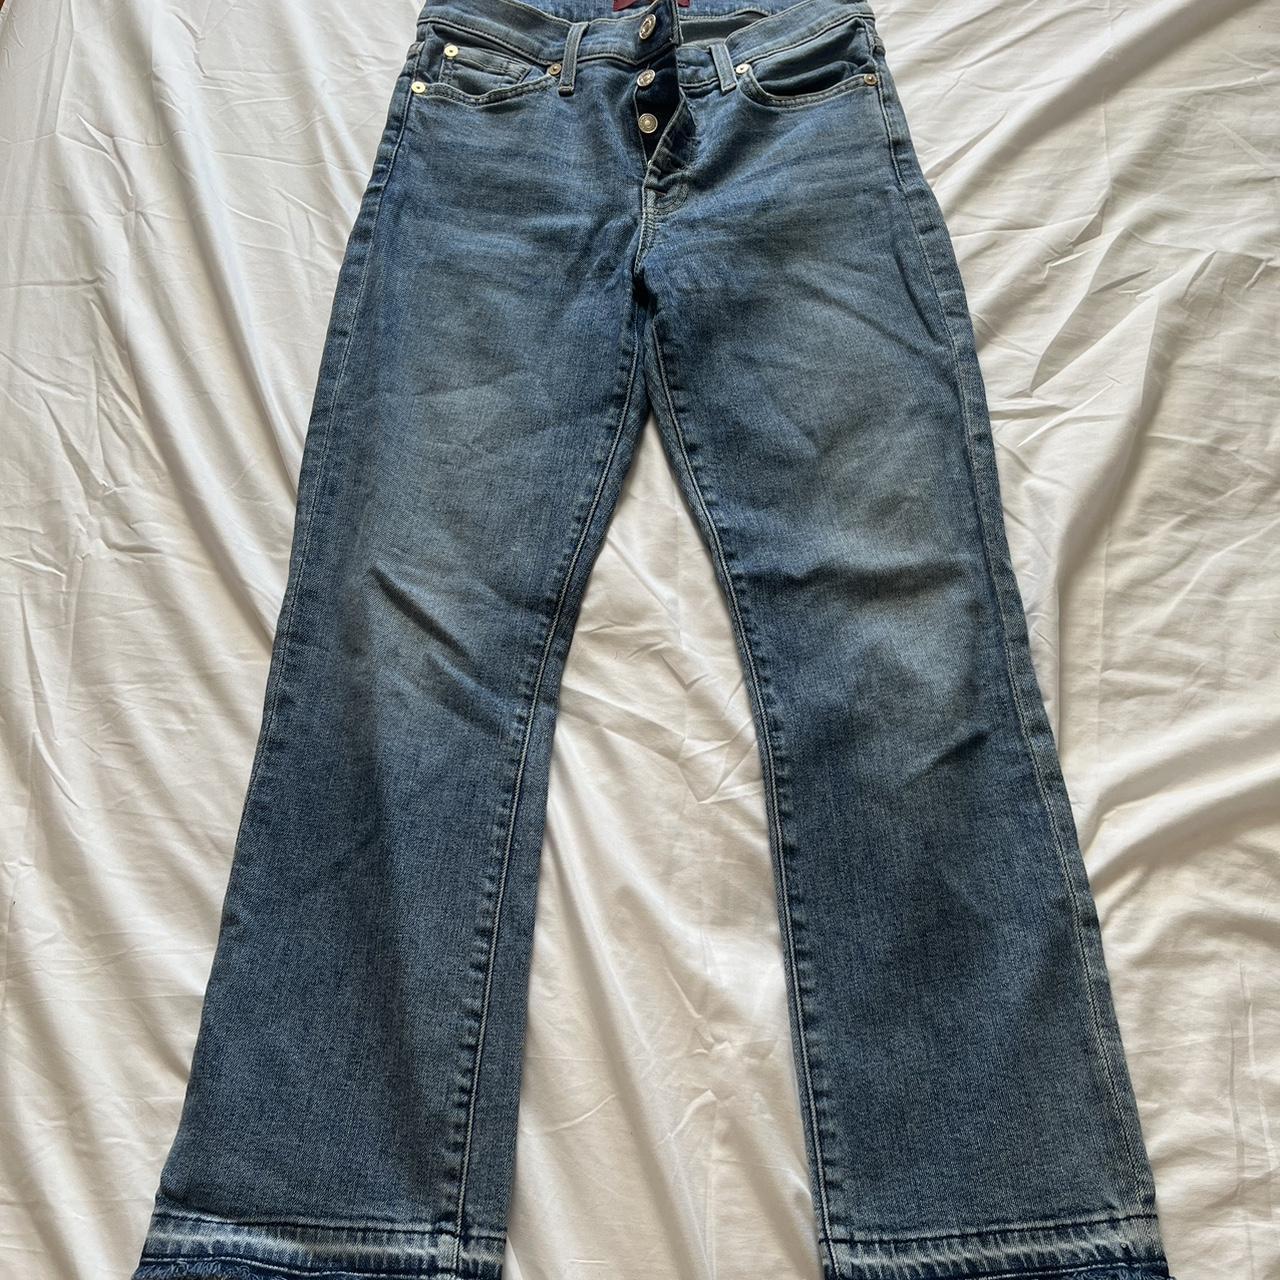 7 for all mankind cropped bootcut jean - Depop